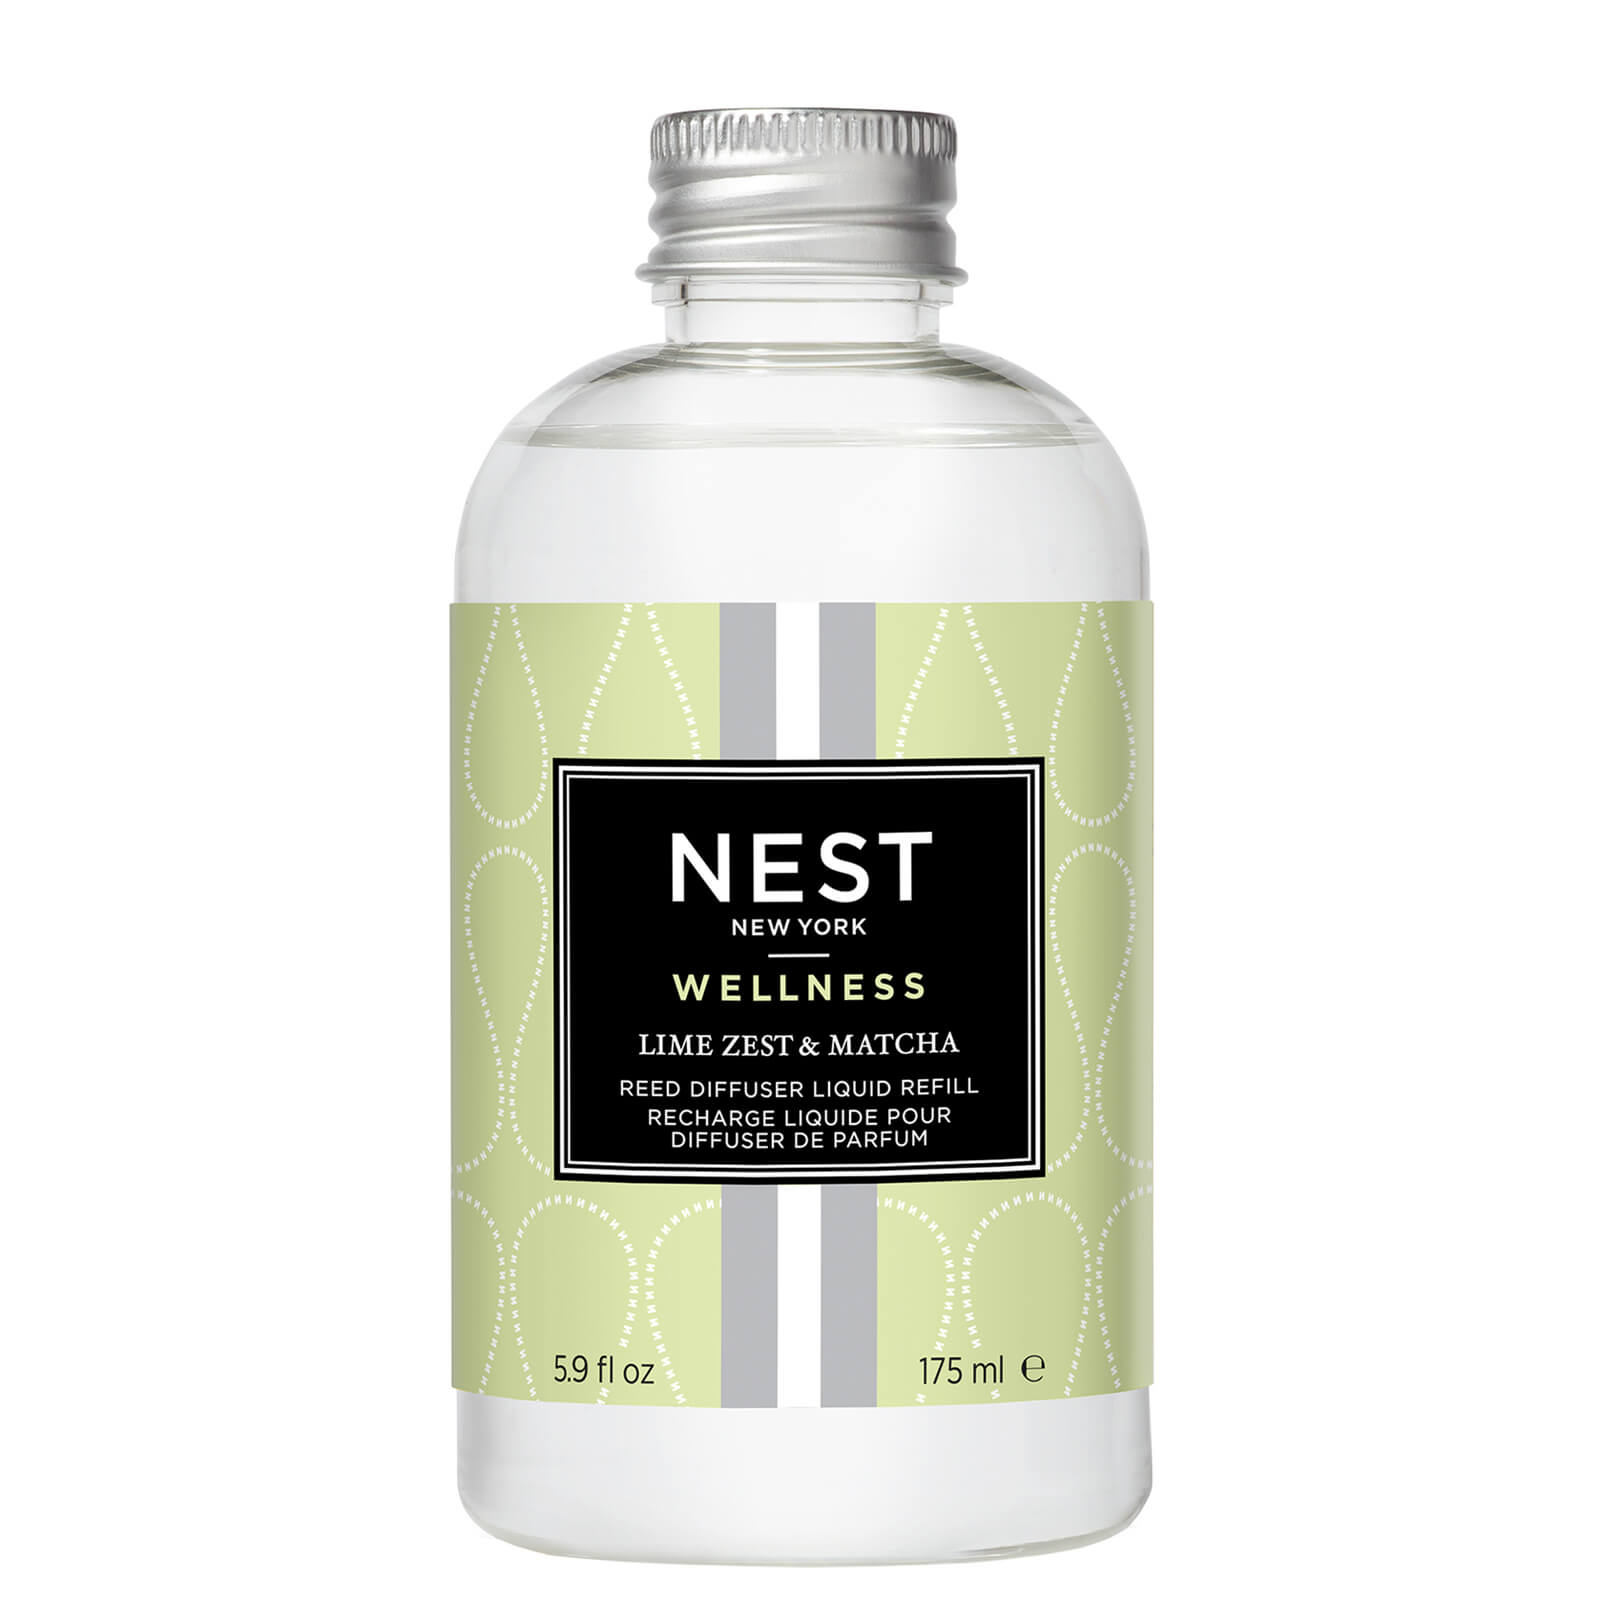 Nest New York Lime Zest & Matcha Reed Diffuser Refill 5.9 Fl. oz In White